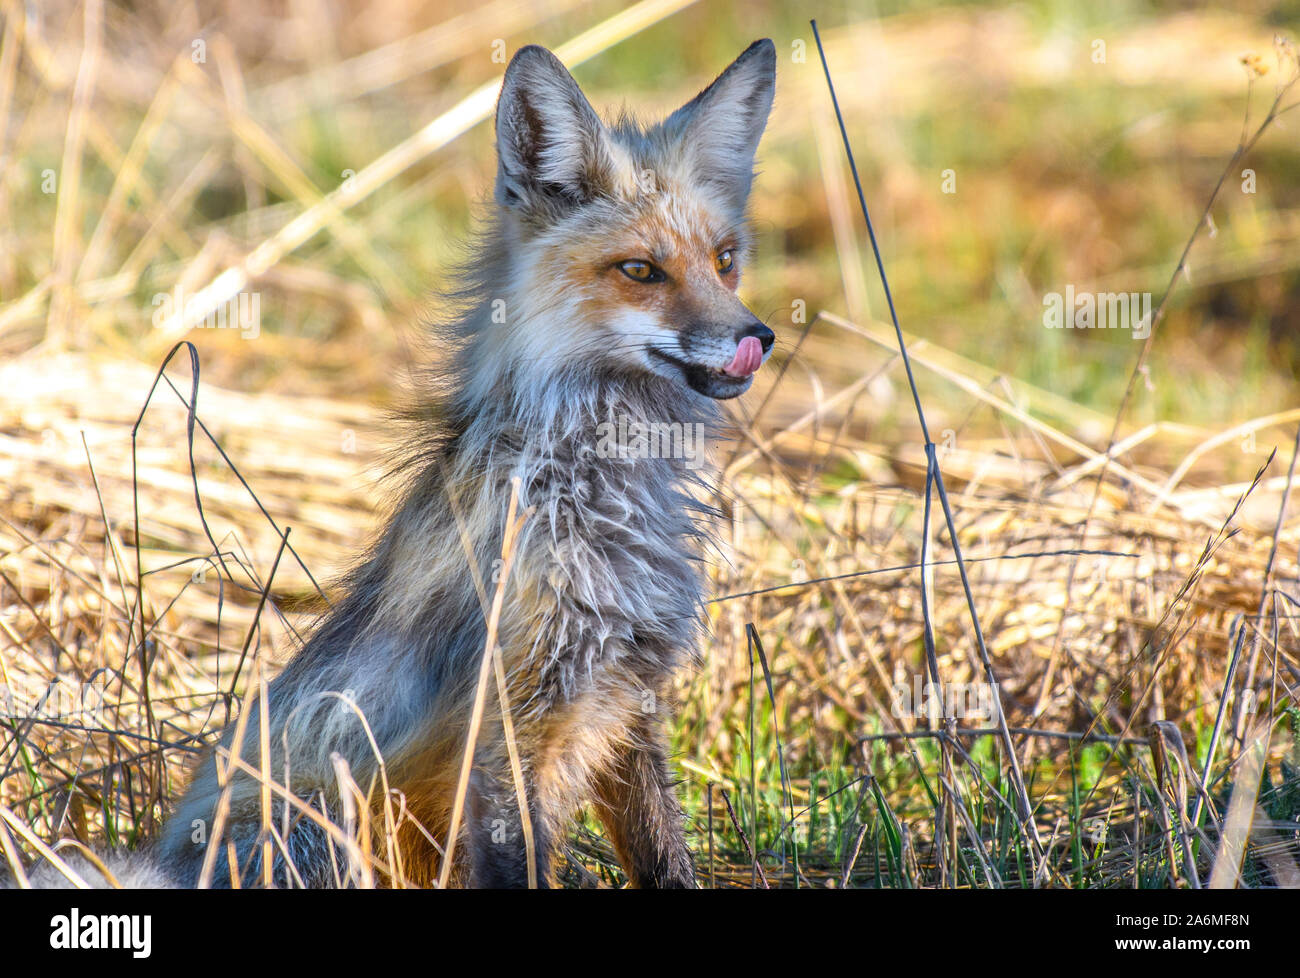 SLY SILVER FOX ENTERS VILLAGE Locals look on in amazement as this silver fox  makes an unannounced visit - the first in this Stock Photo - Alamy